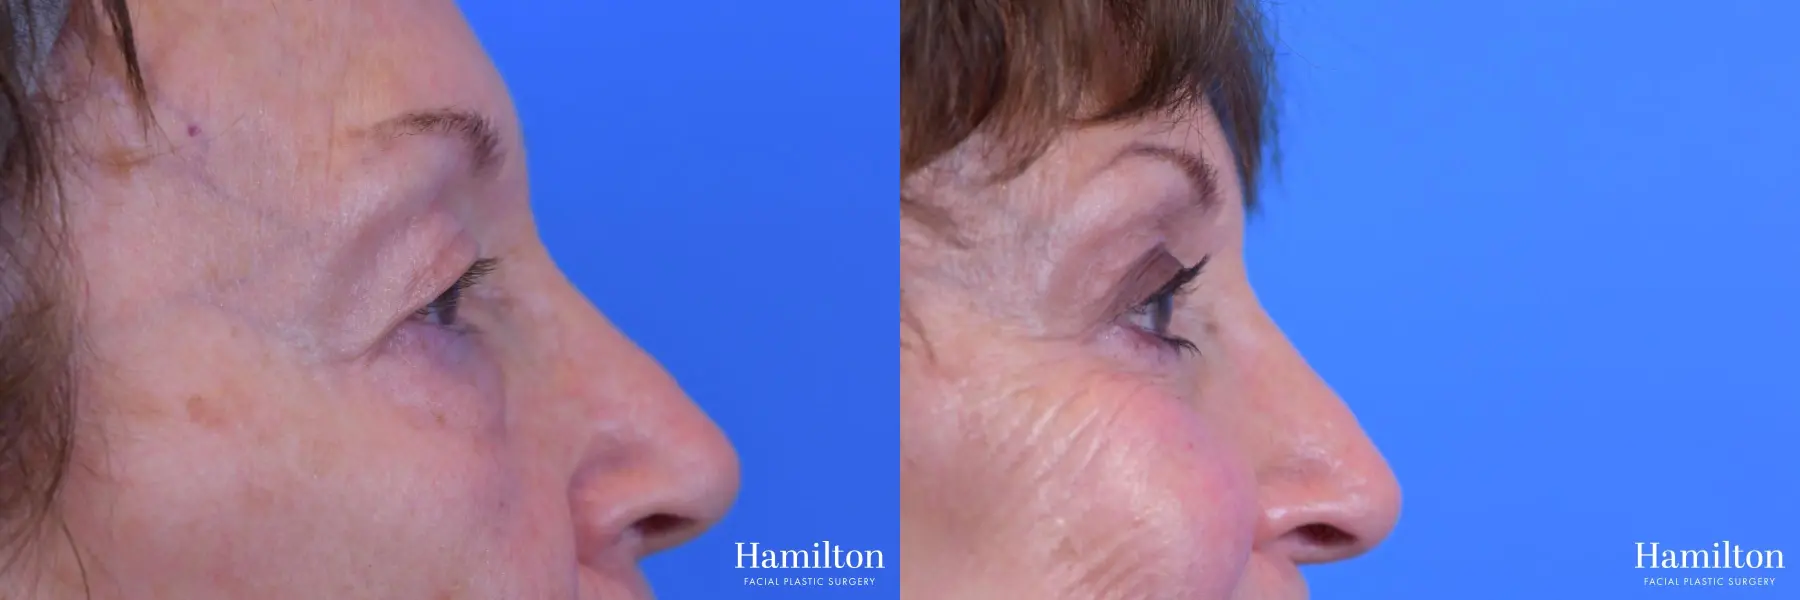 Blepharoplasty: Patient 8 - Before and After 3